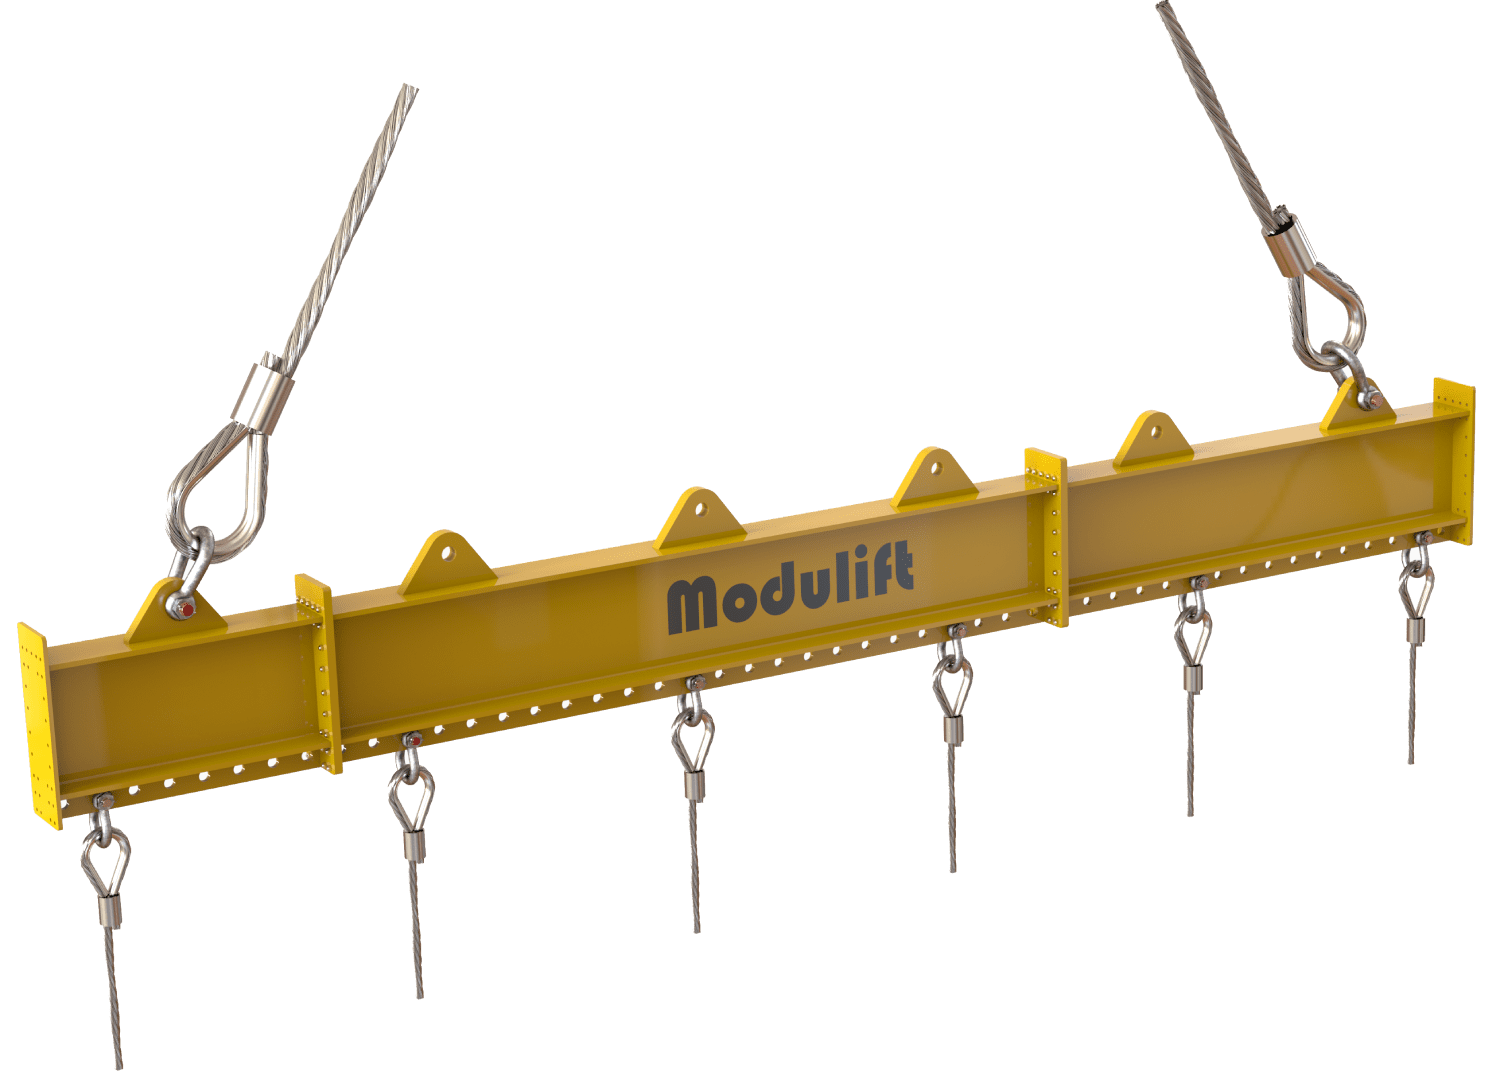 Adjustable Modular Lifting Beam, AML, with mulitple pad eyes to lift various weights and sizes